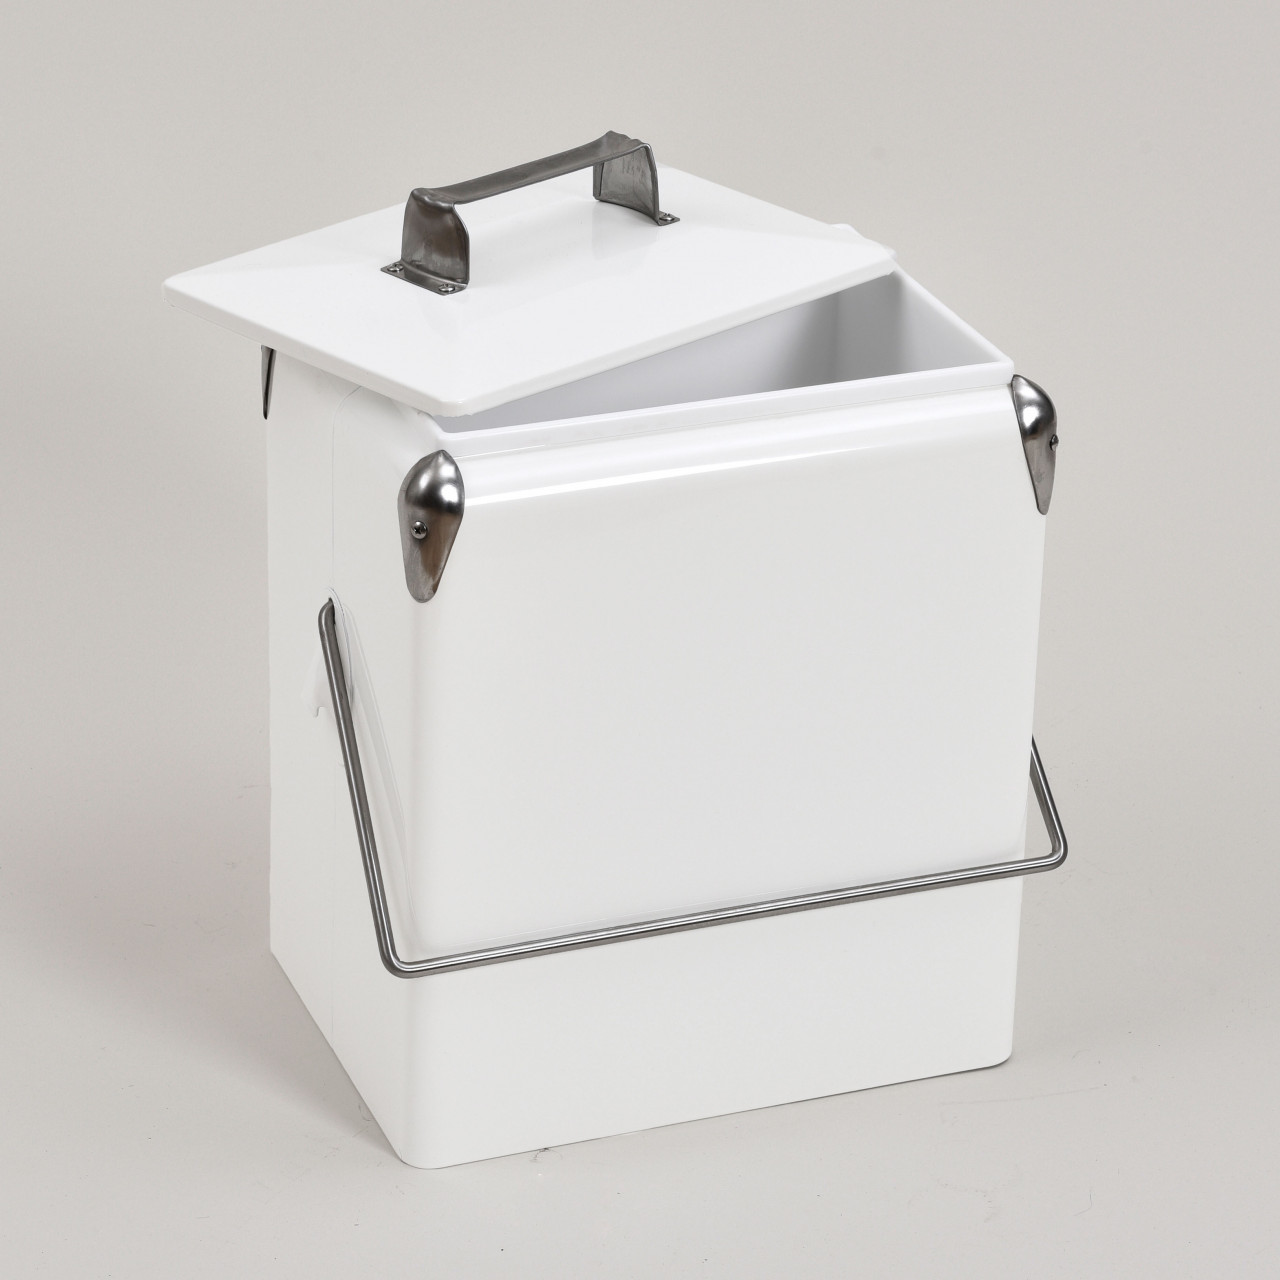 White | Vintage Cooler | Coolers Advertising products to leading the | A of Sasquatch / | Specialty supplier Fridges promotional Products